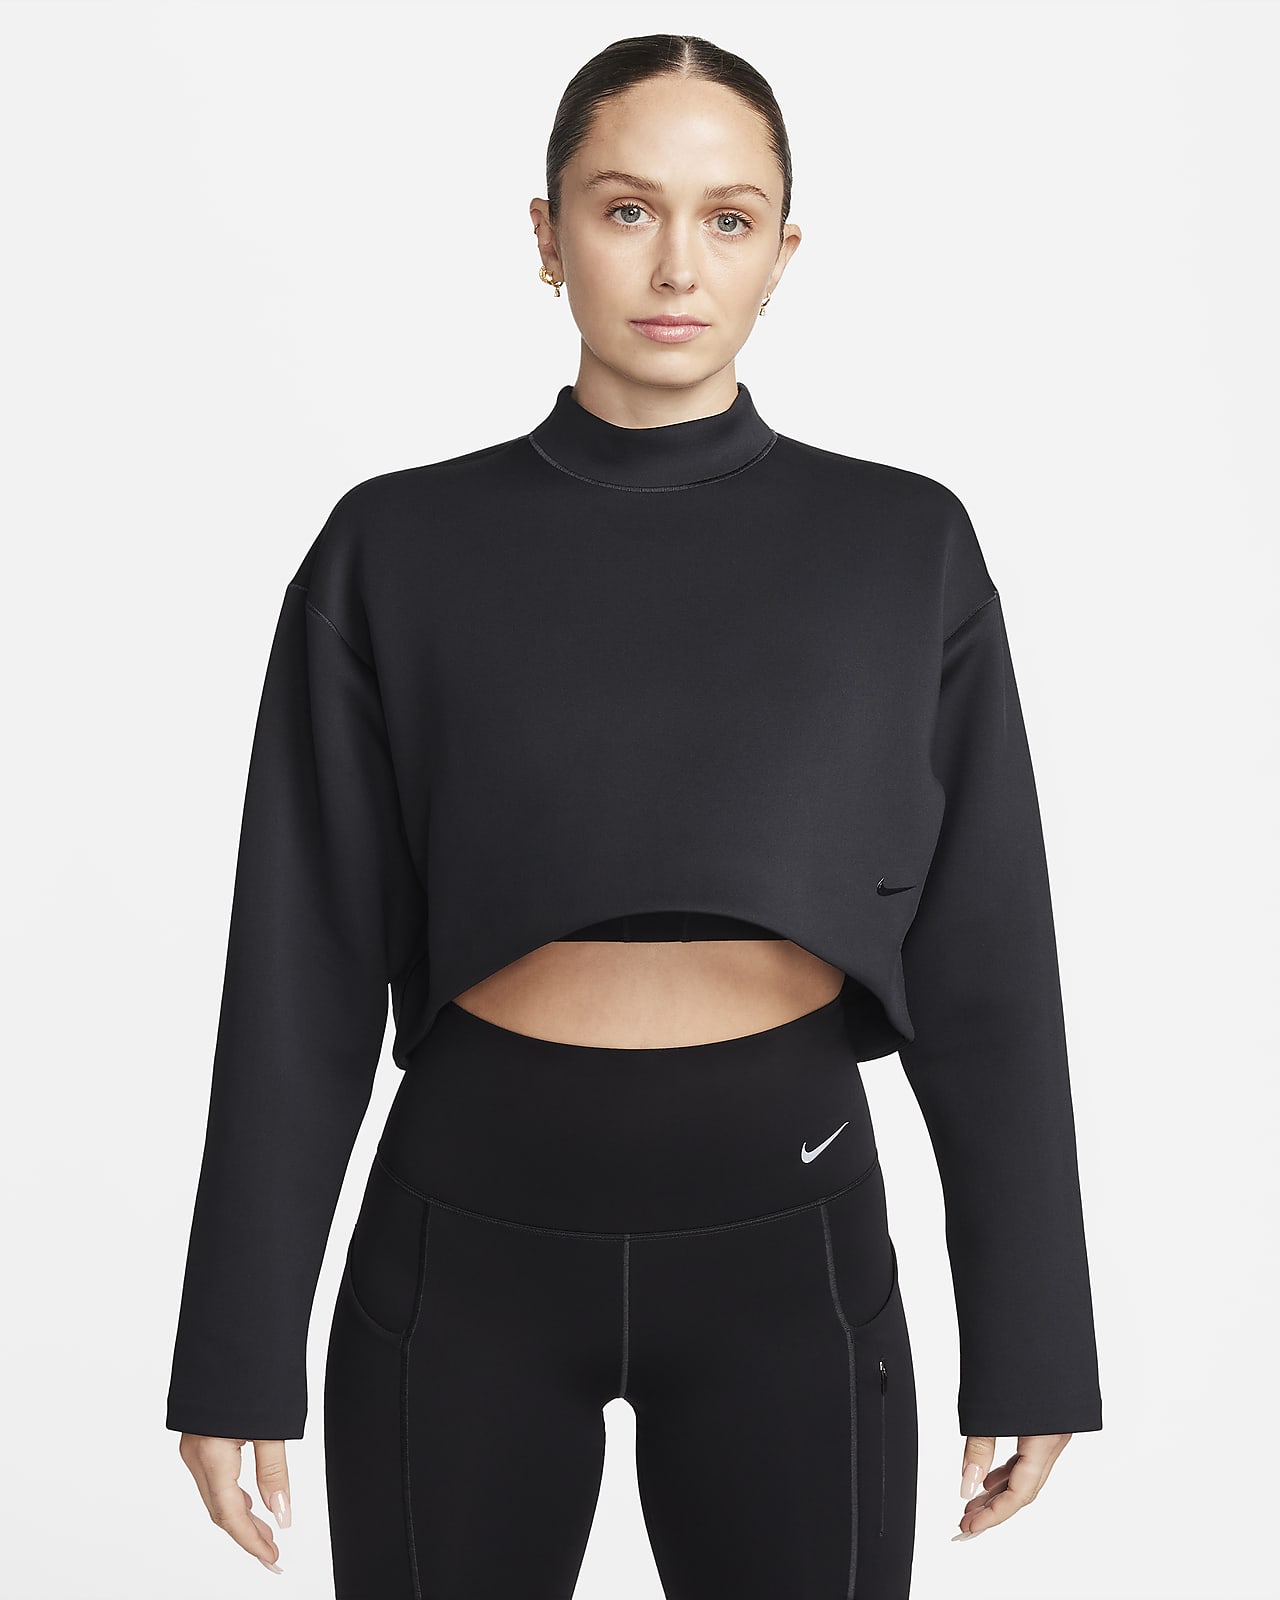 ReFit - Nike Pro Dri Fit Sports Bra. Condition: Excellent Size: XL Price:  N1,500 Availability: Yes Payment validates orders. No refunds but goods can  be exchanged with condition. Pick up option available